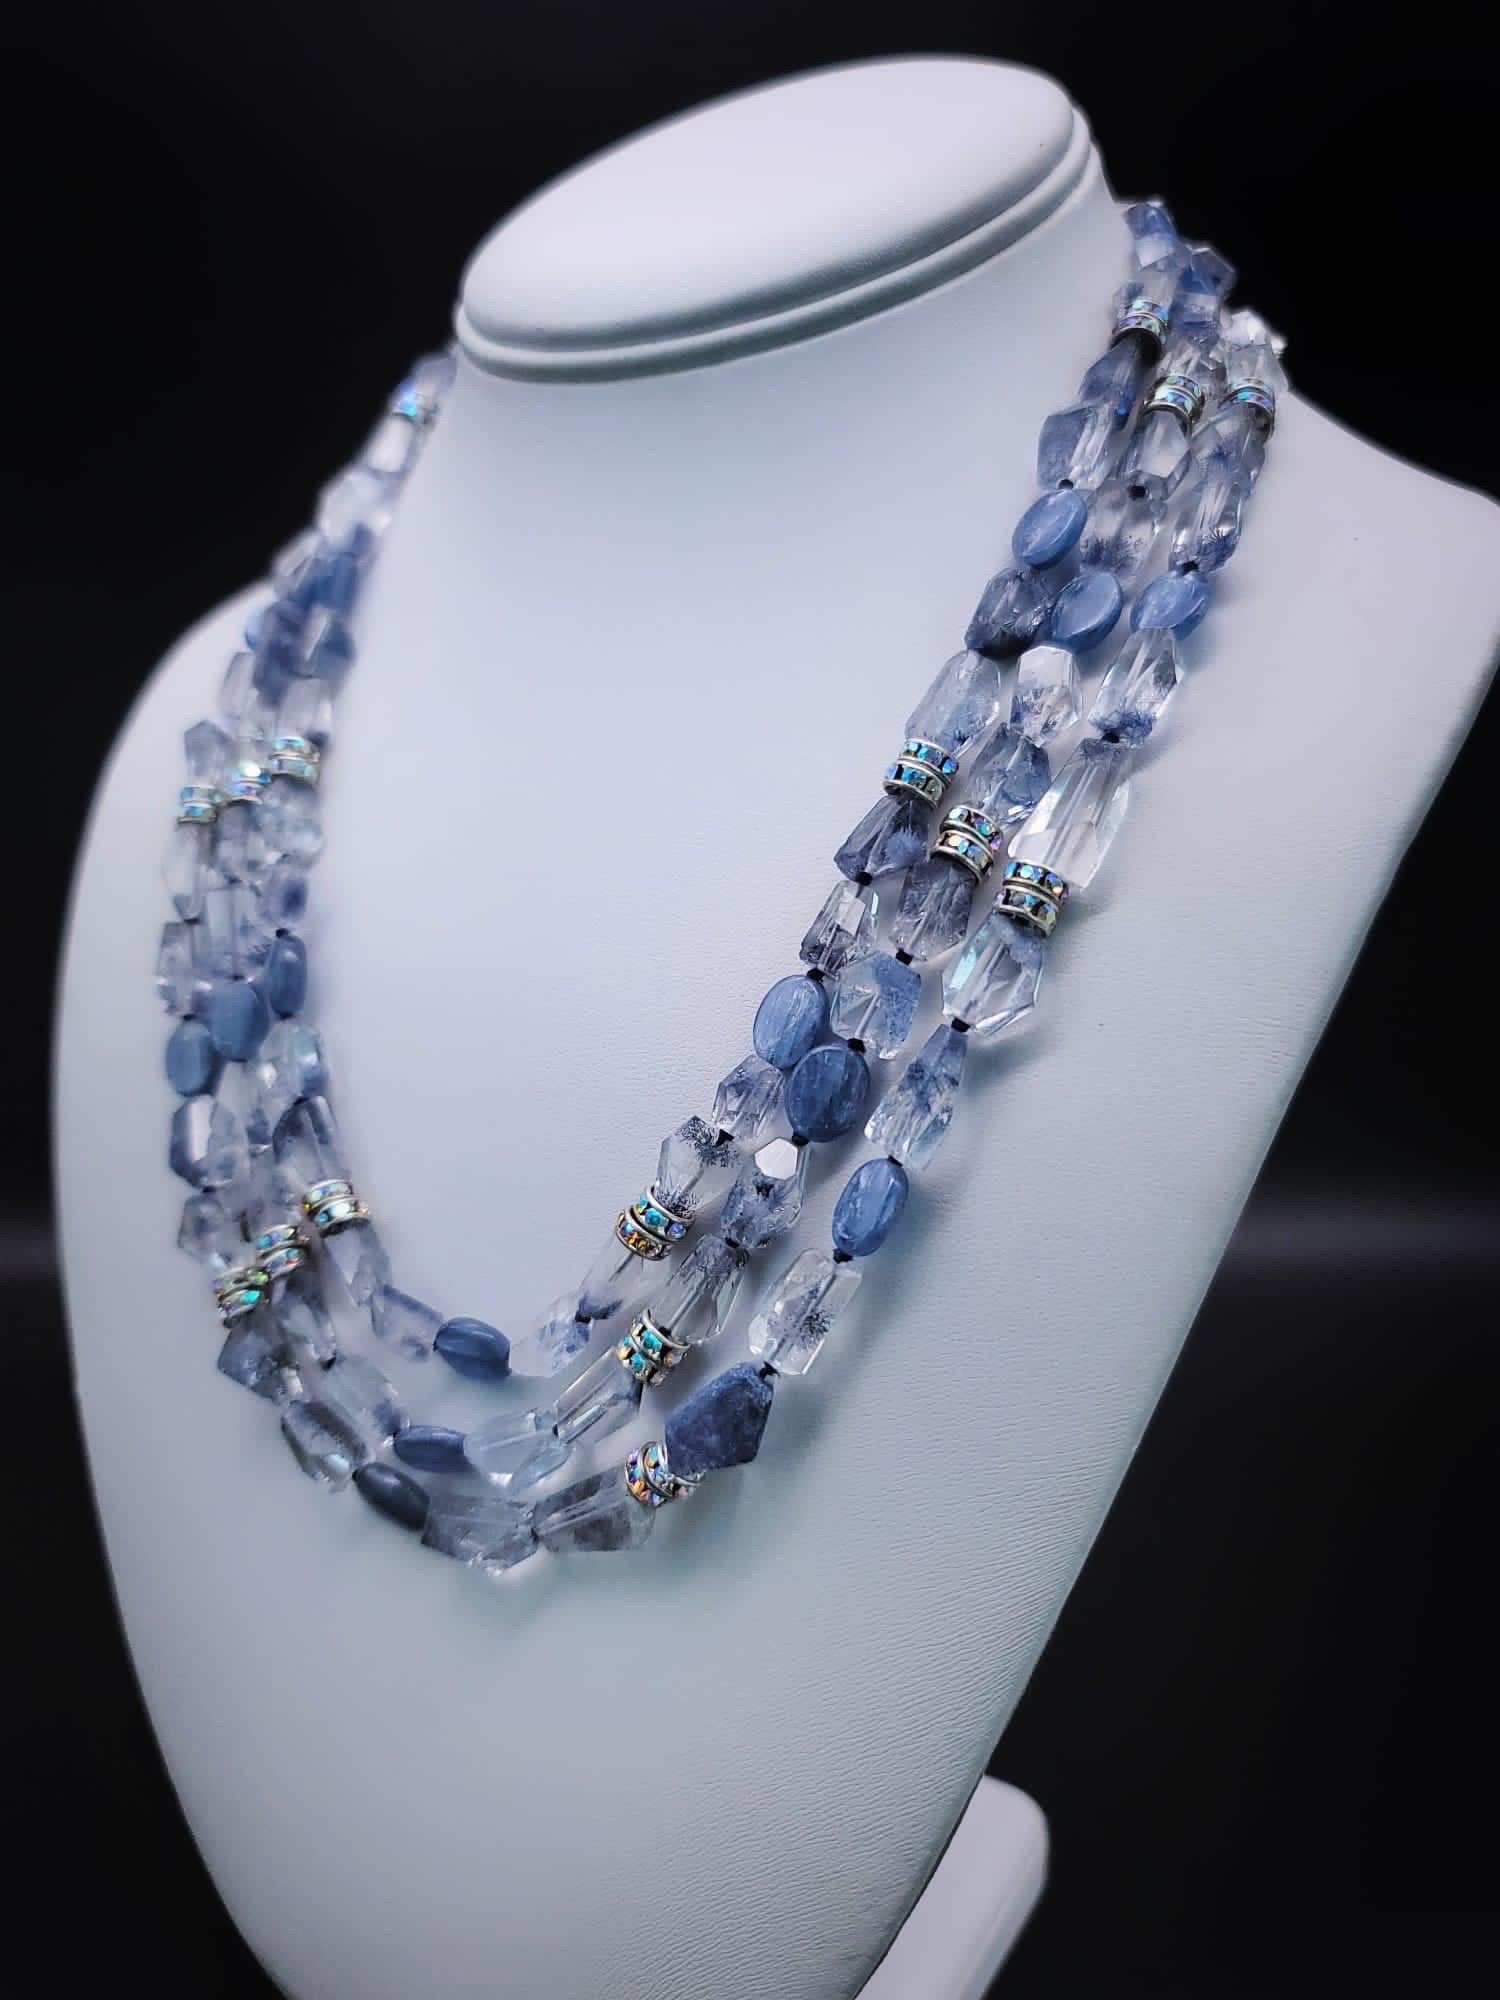 One-of-a-Kind

This exquisite piece of jewelry is a one-of-a-kind matinee-length necklace that exudes a sense of timeless elegance. The necklace features faceted Quartz beads that have been expertly mixed with Kyanite to create a beautiful soft blue